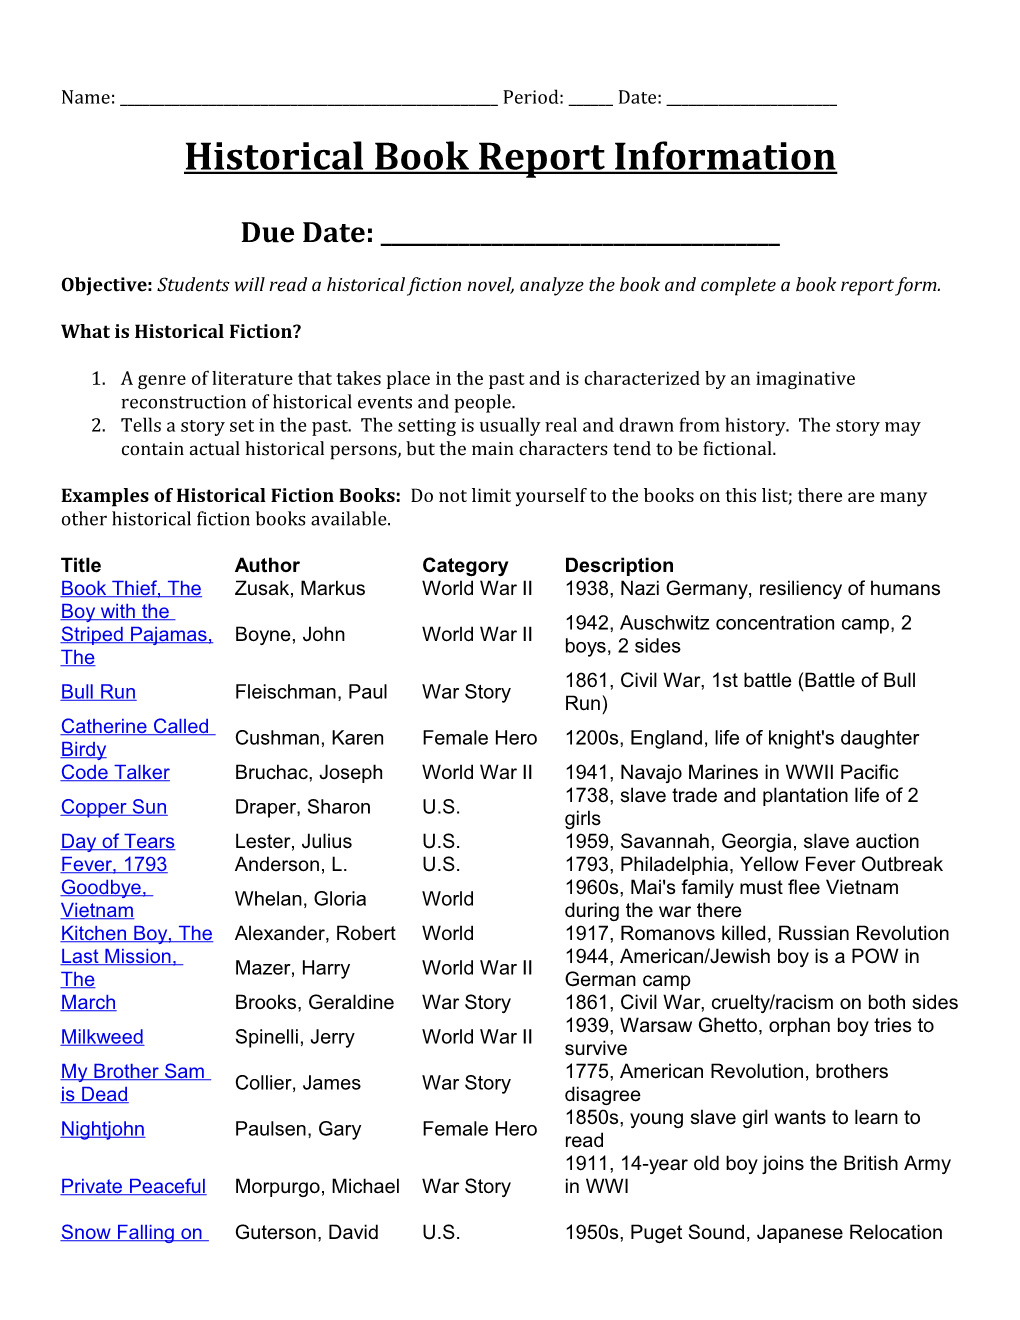 Historical Book Report Information